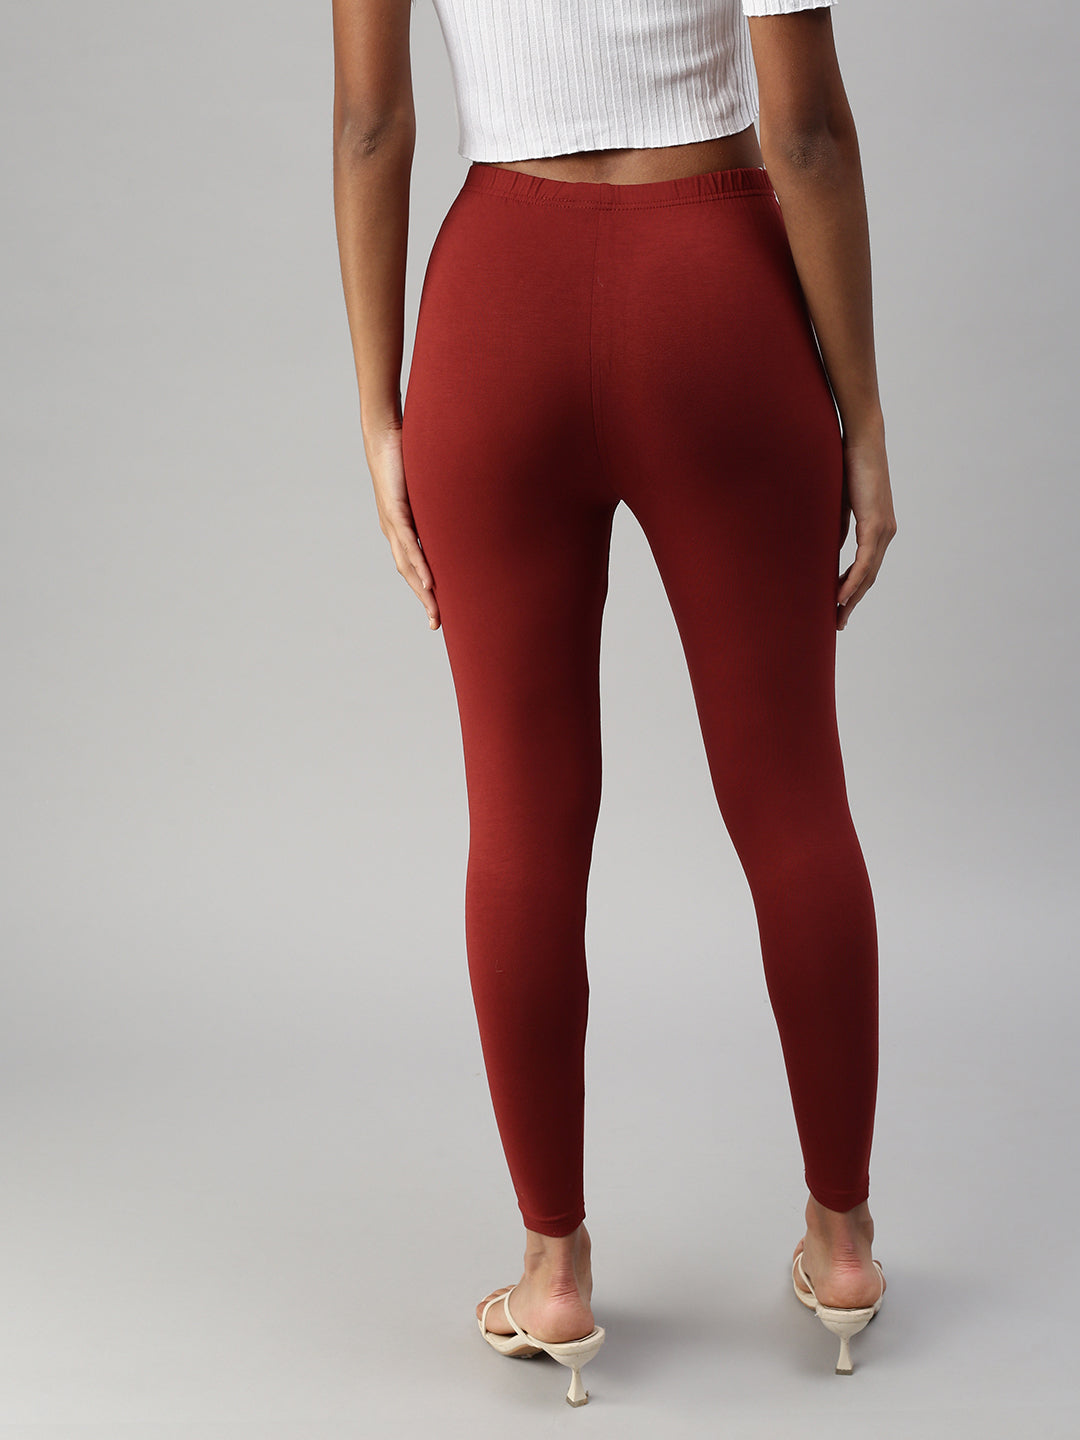 Plain Straight Fit Ladies Red Woolen Leggings, Size: Free at Rs 220 in  Ludhiana